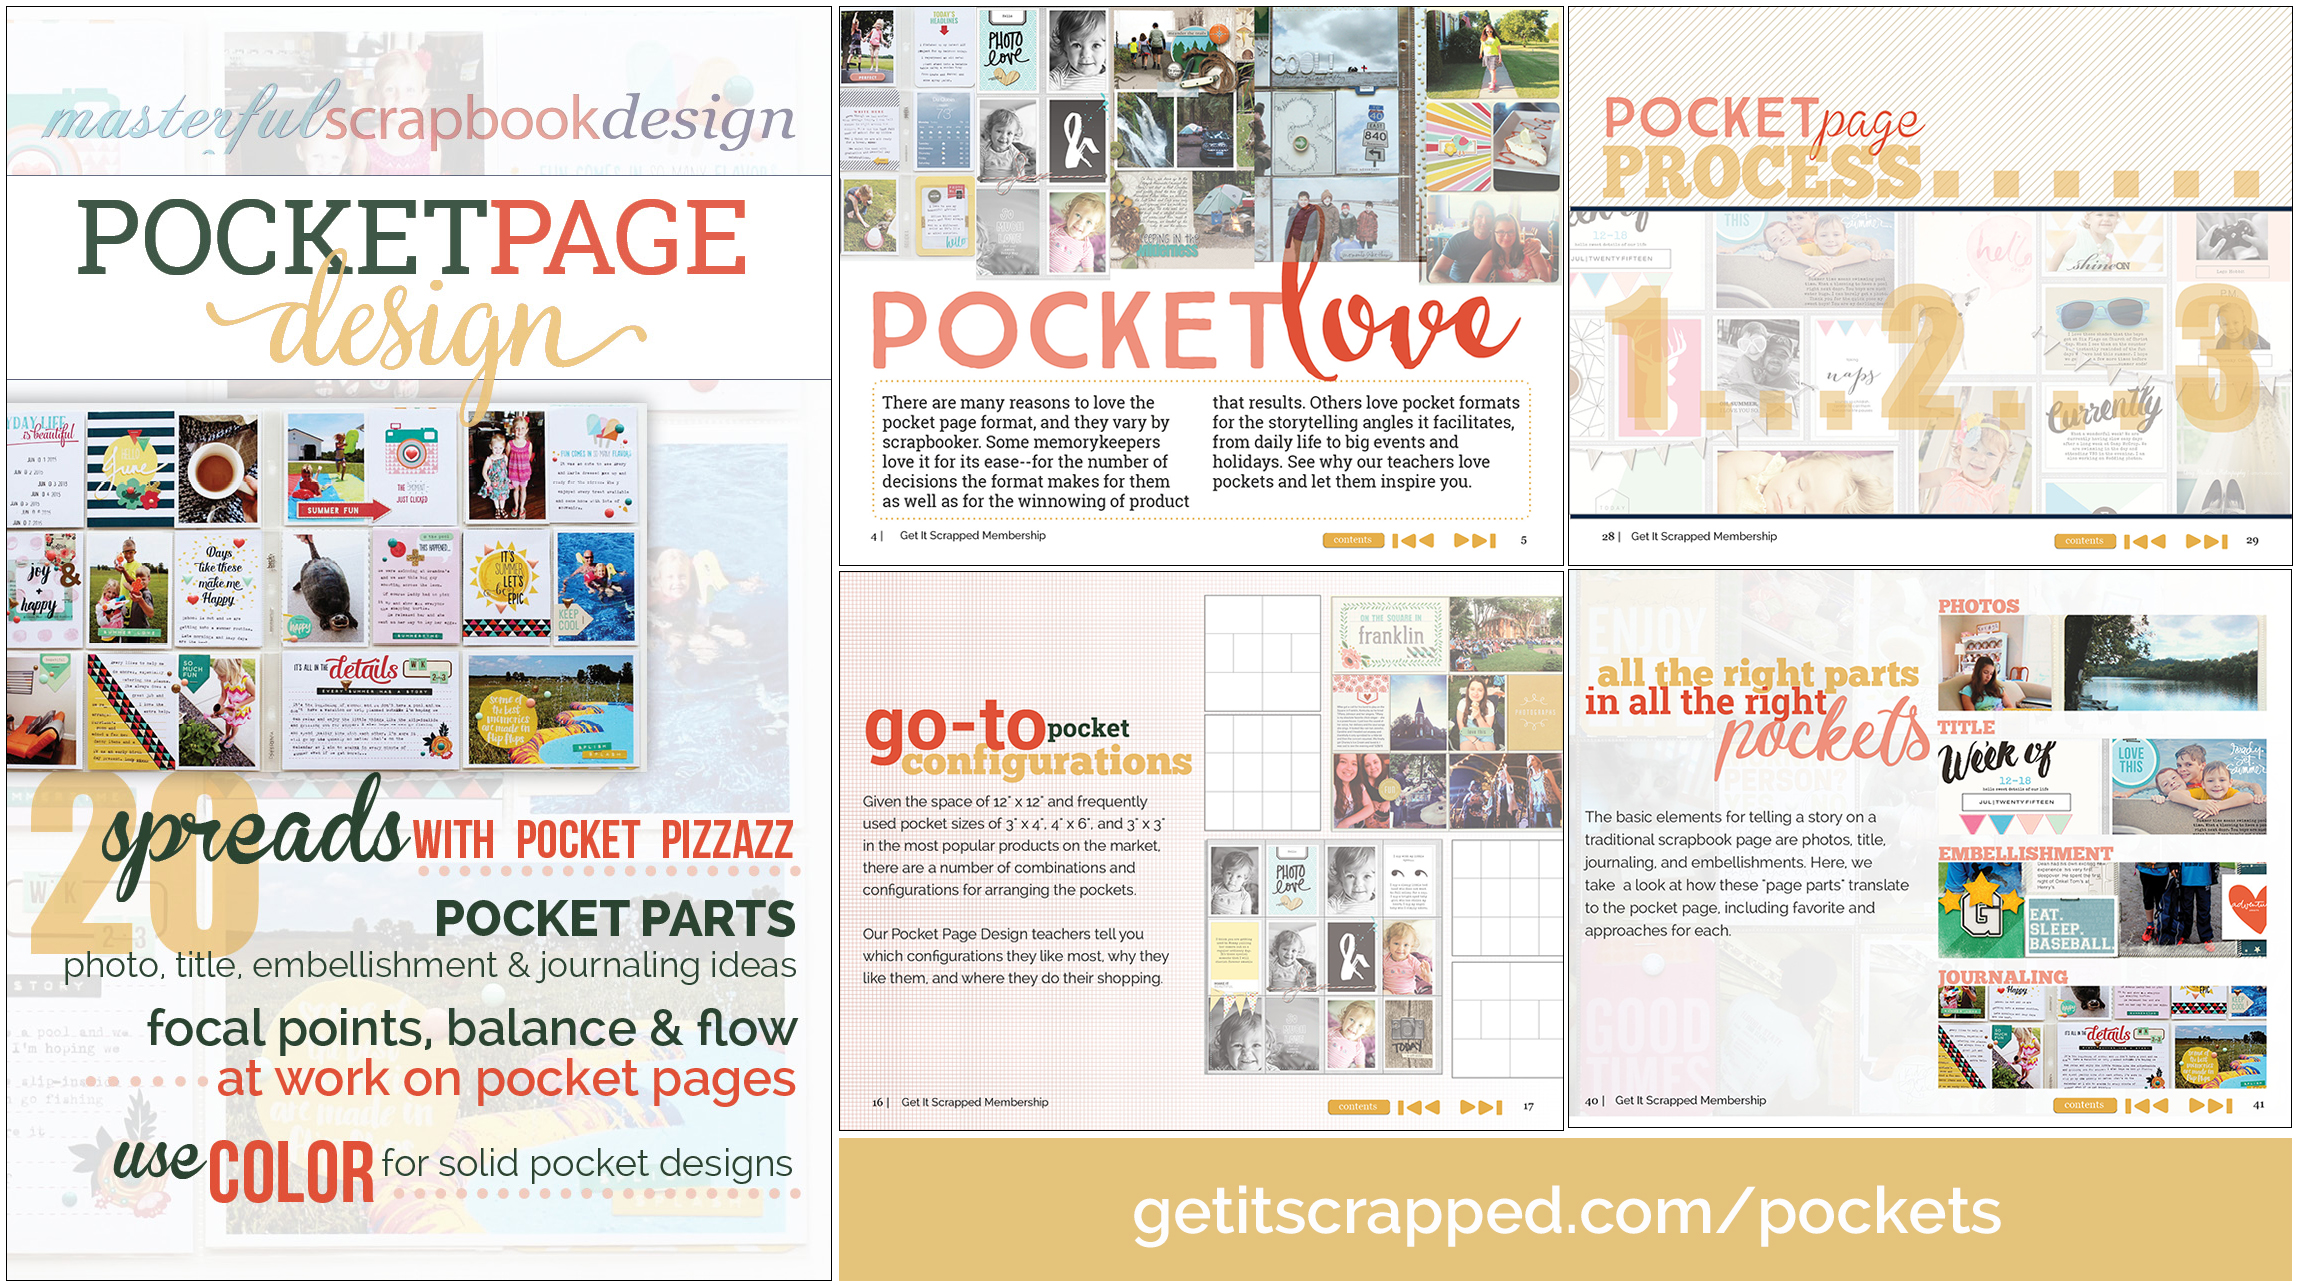 Learn Pocket Page Design from 5 Passionate Practioners